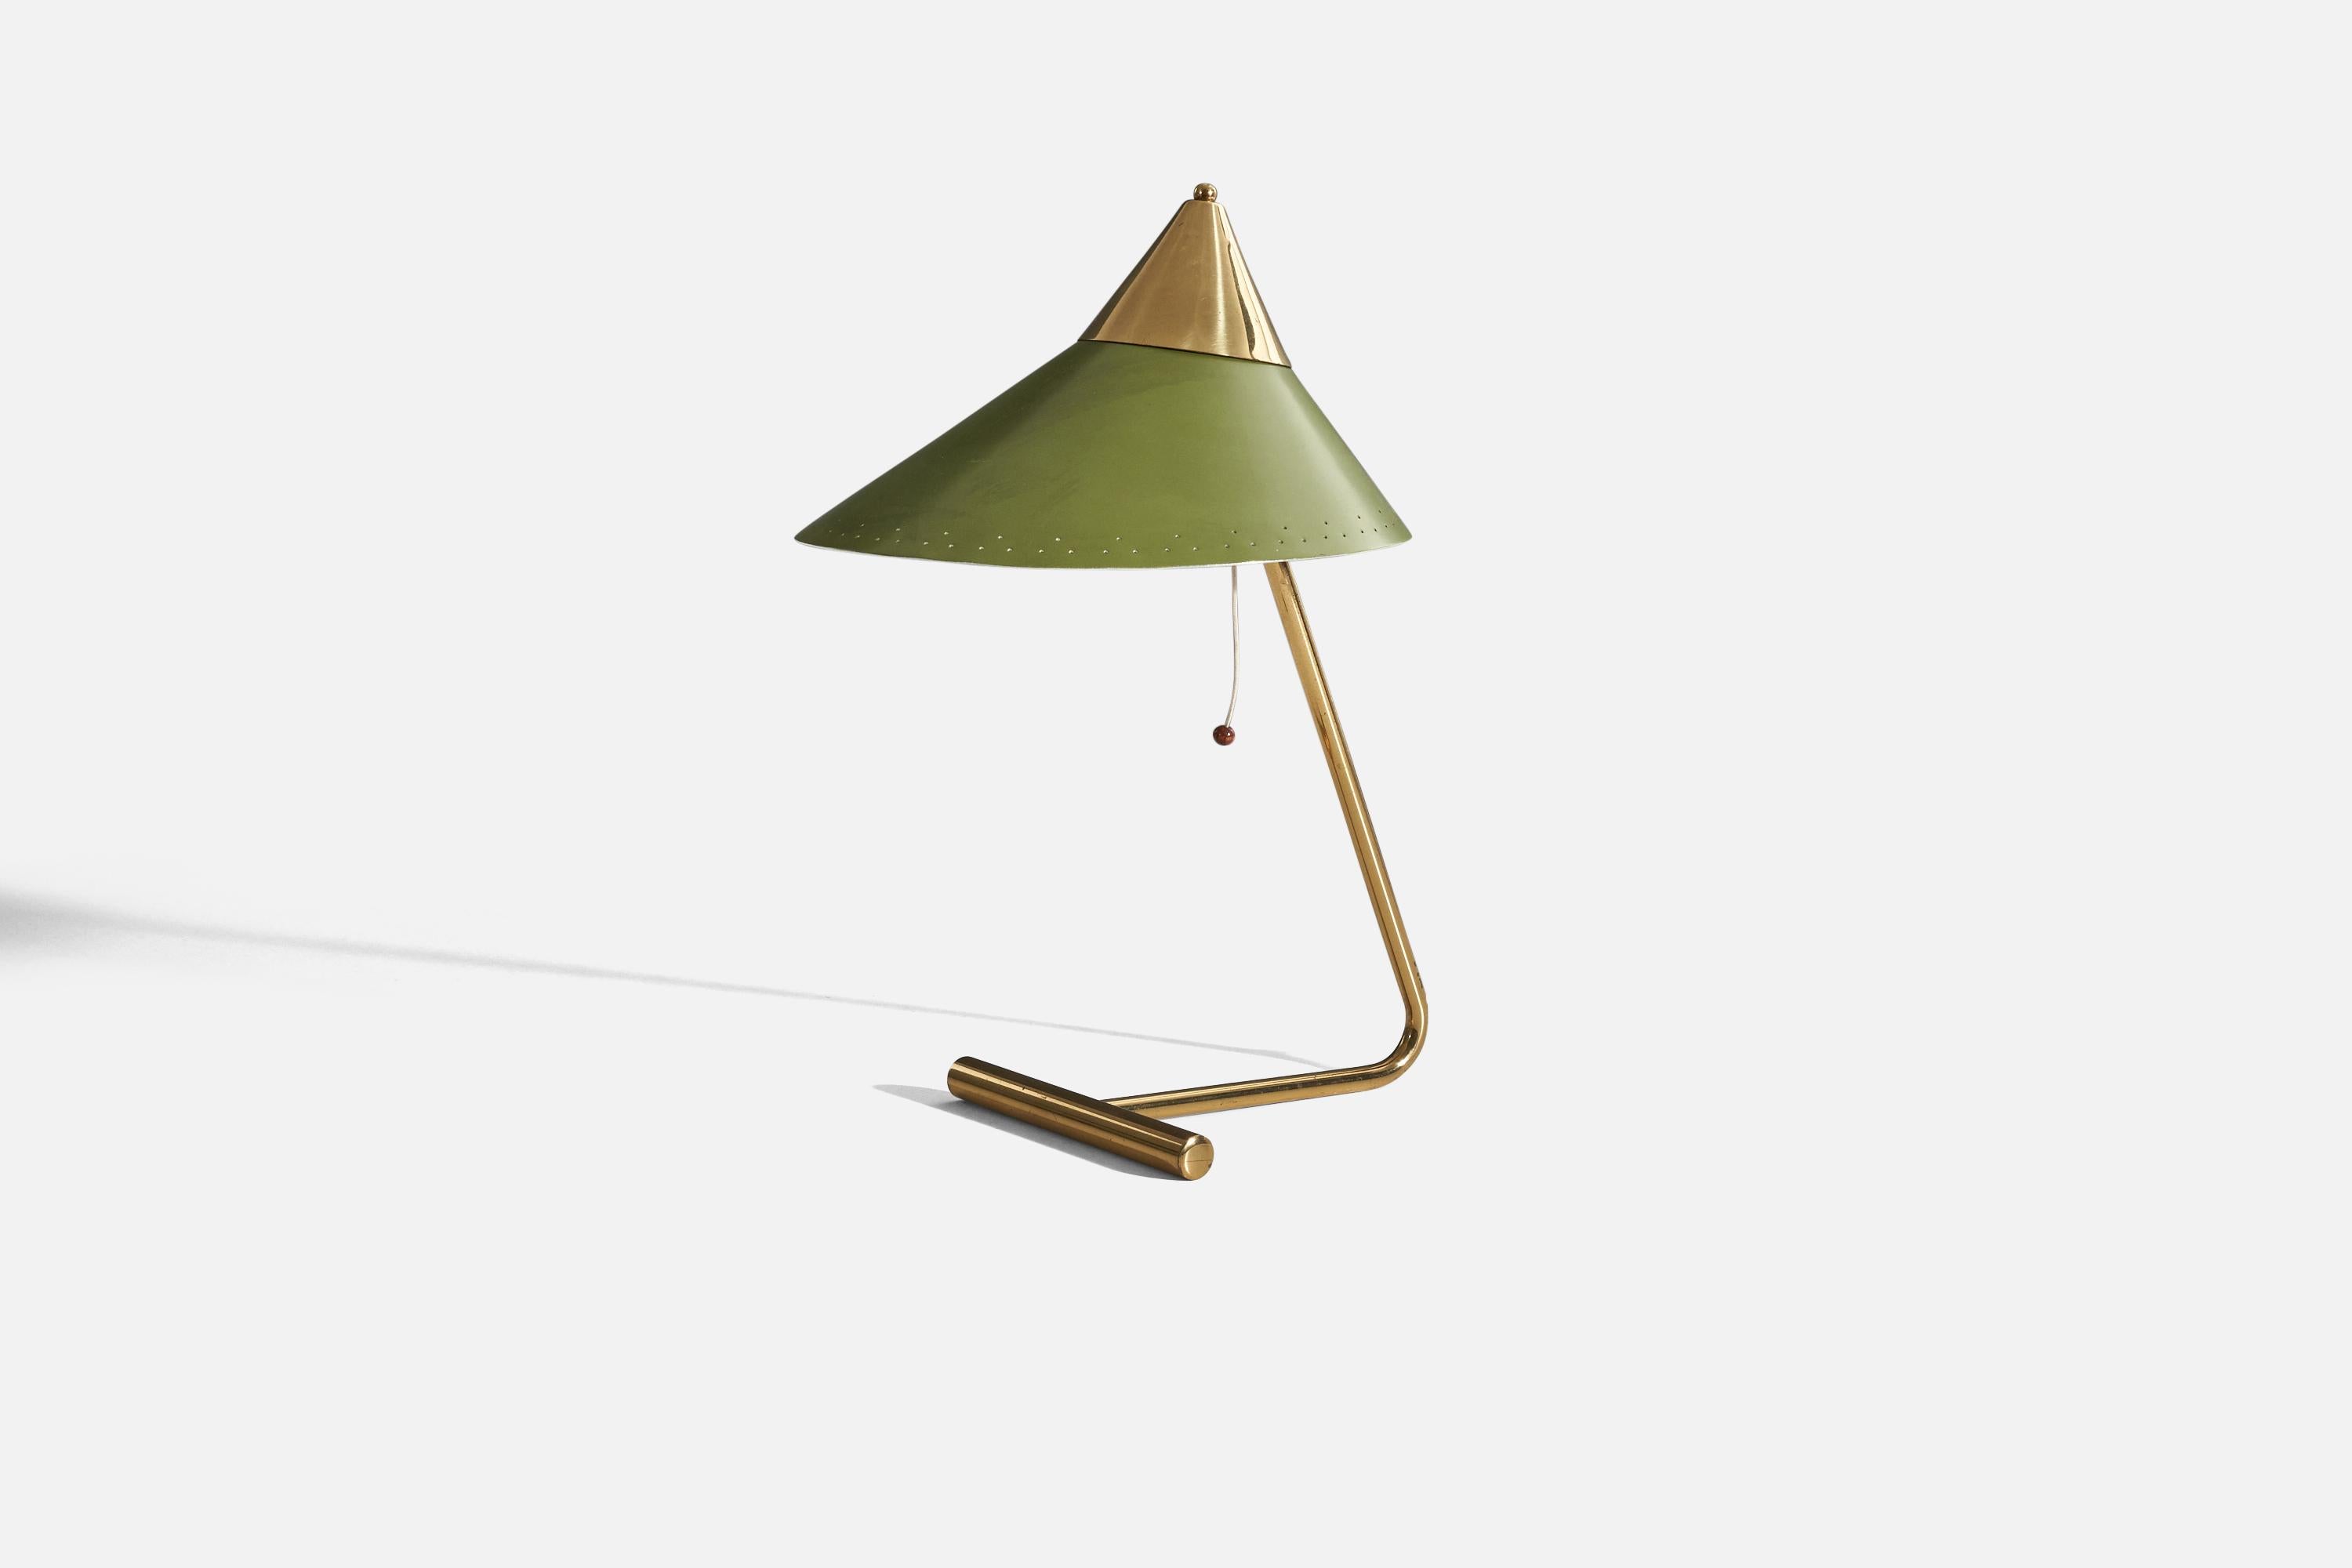 A brass and green-lacquered metal table lamp designed and produced by Svend Aage Holm Sørensen, Denmark, 1950s.